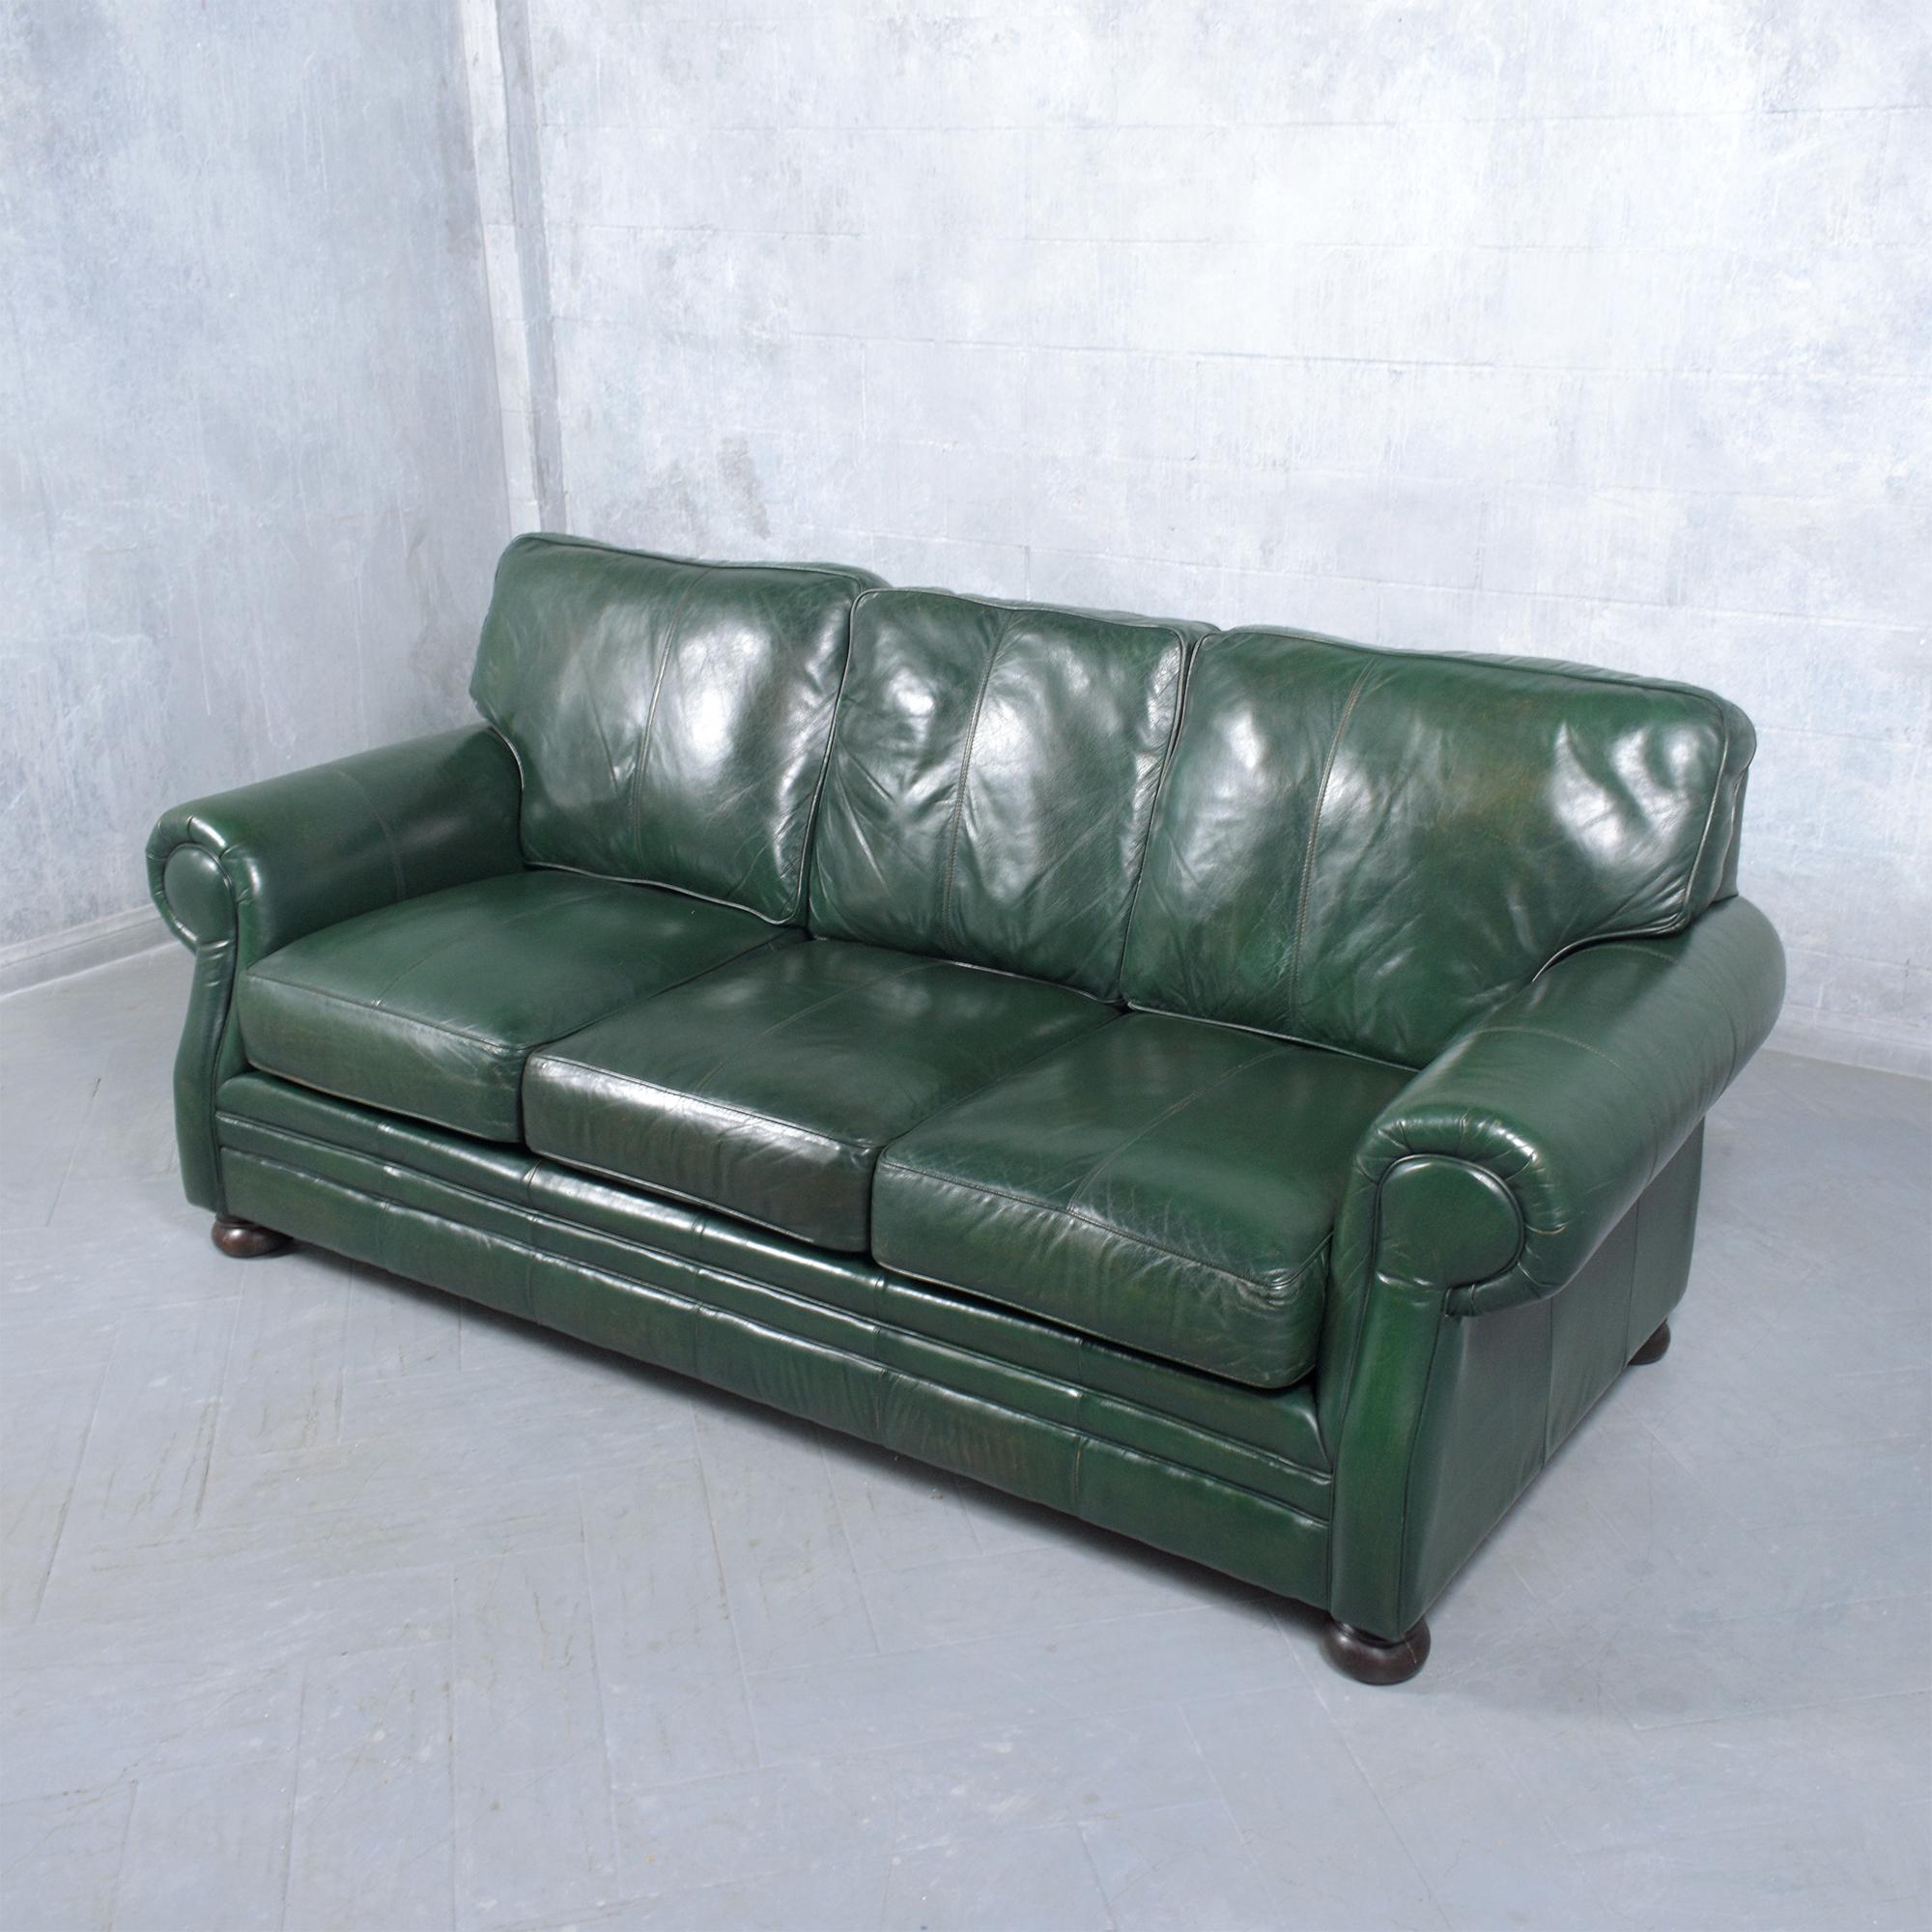 Restored 1980s Vintage Leather Sofa in Dark Green with Carved Bun Legs For Sale 3